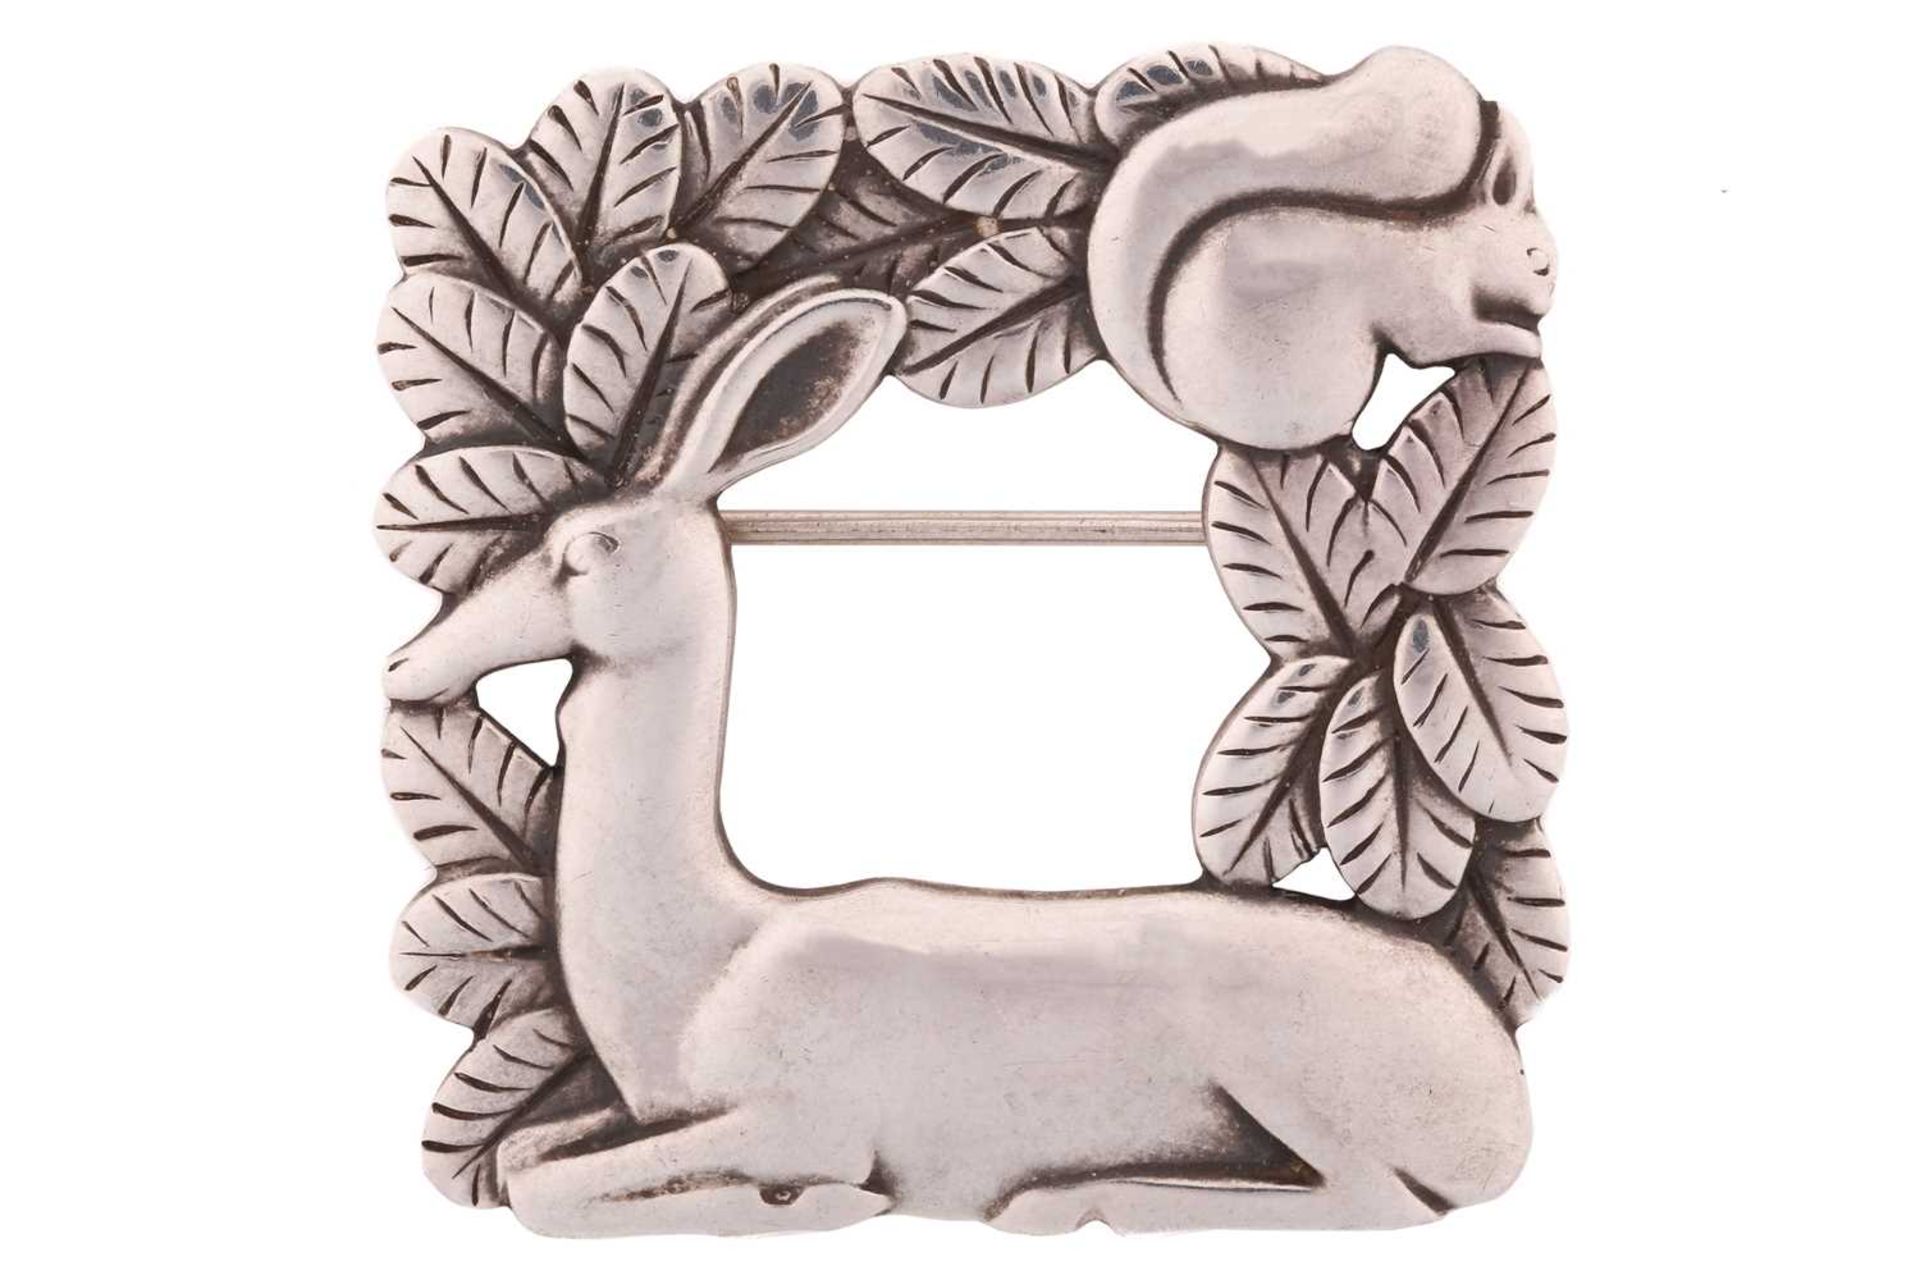 Georg Jensen; a 925 sterling silver square openwork brooch, featuring a resting deer and squirrel in